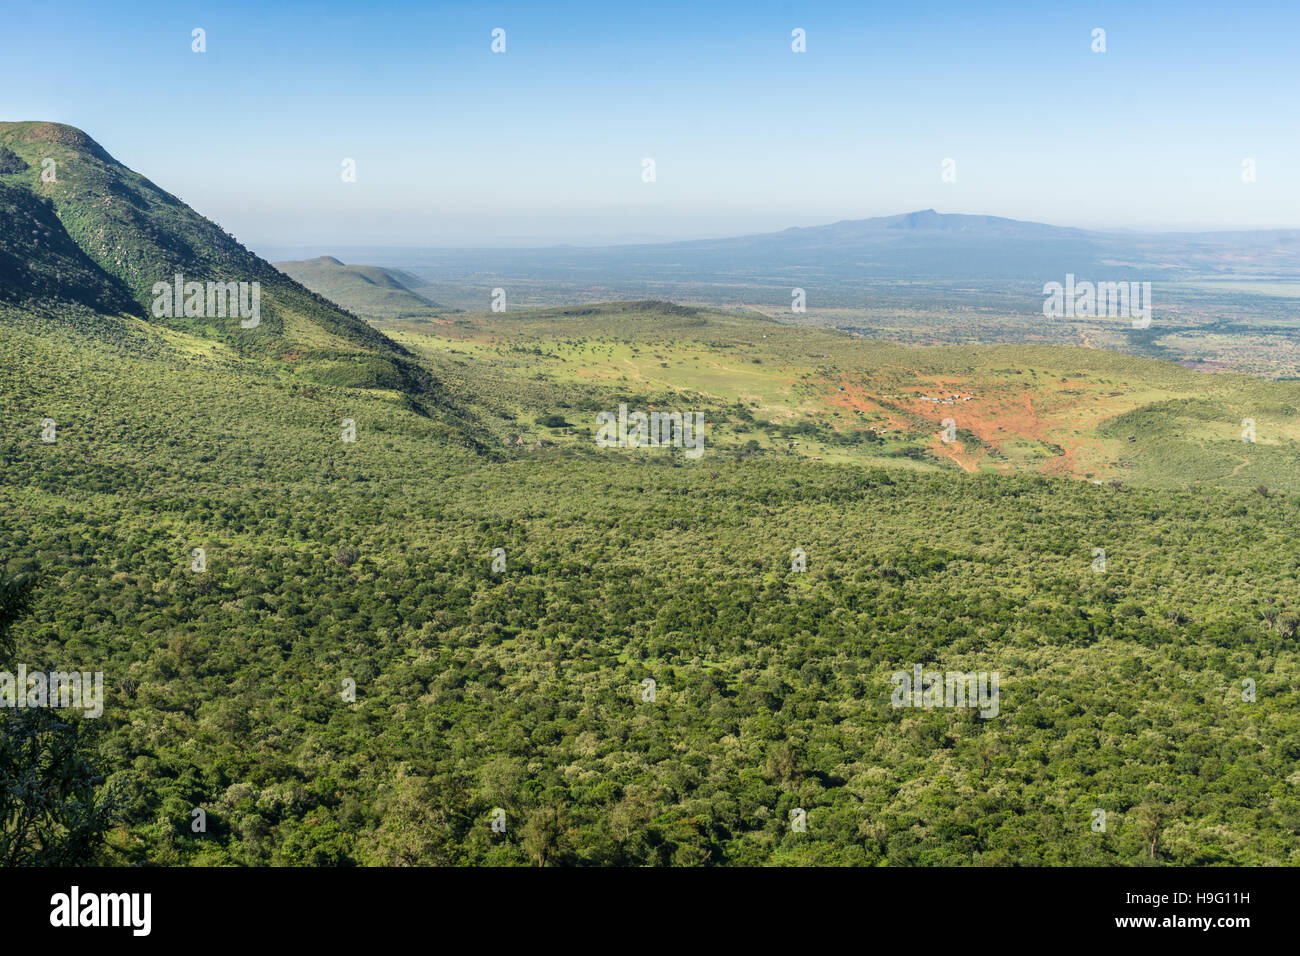 View of the Great Rift Valley from a viewpoint in Kenya Stock Photo